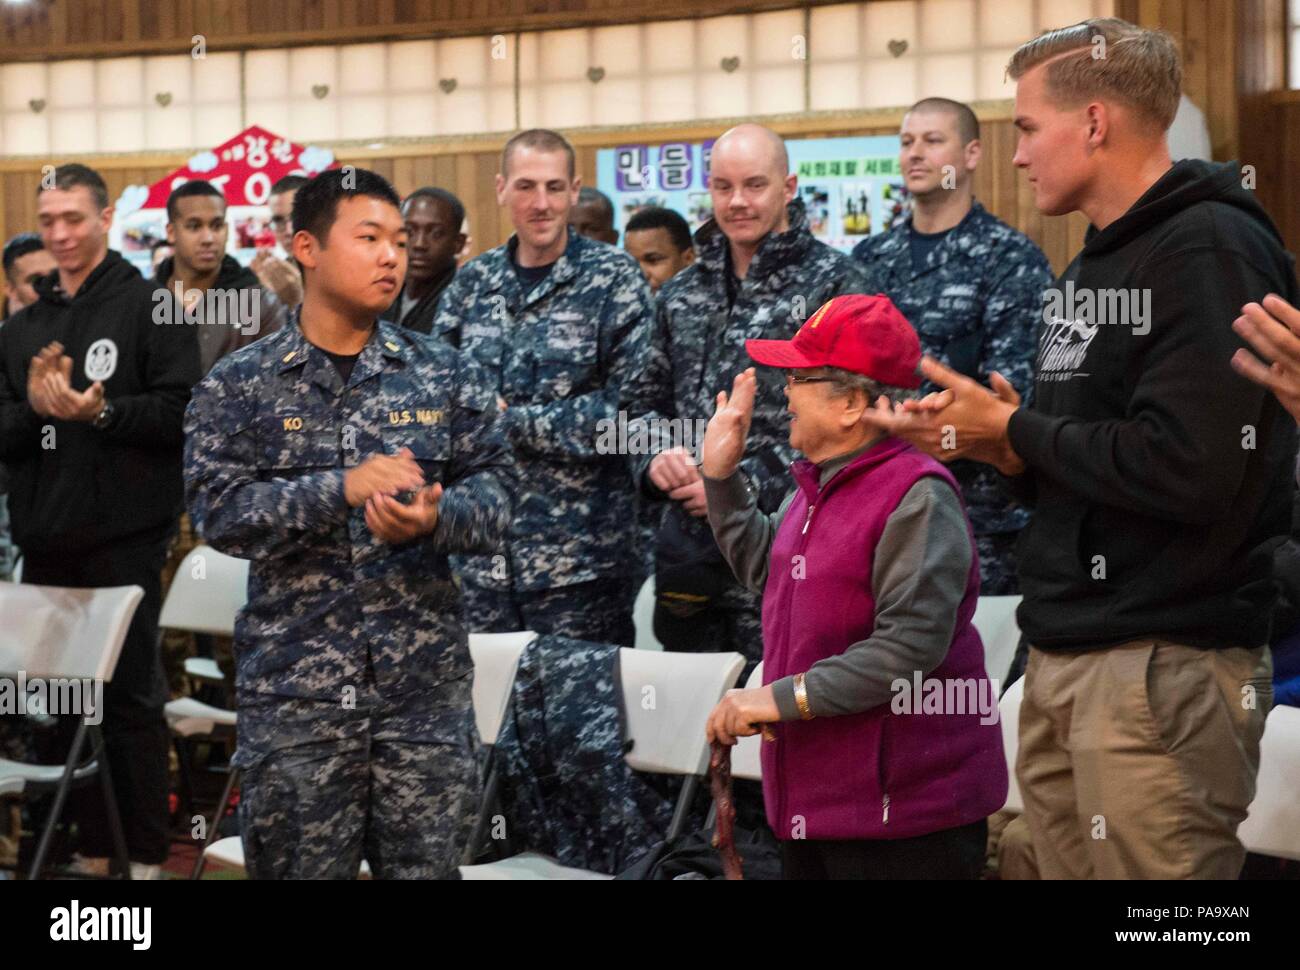 160304-N-RM689-197 GYEONGNAM PROVINCE, Republic of Korea (March 4, 2014) - Sailors and Marines from amphibious dock landing ship USS Ashland (LSD 48) and amphibious dock landing ship USS Germantown (LSD 42) clap to show their appreciation for Imsoon Kim, the founder of Kojedo Aikwangwon Home and School for the Intellectually Disabled during a community relations (COMREL) event. Ashland is assigned to the Bonhomme Richard Expeditionary Strike Group (BHRESG) and is conducting a routine patrol in the U.S. 7th Fleet area of responsibility along with embarked 31st Marine Expeditionary Unit (MEU). ( Stock Photo